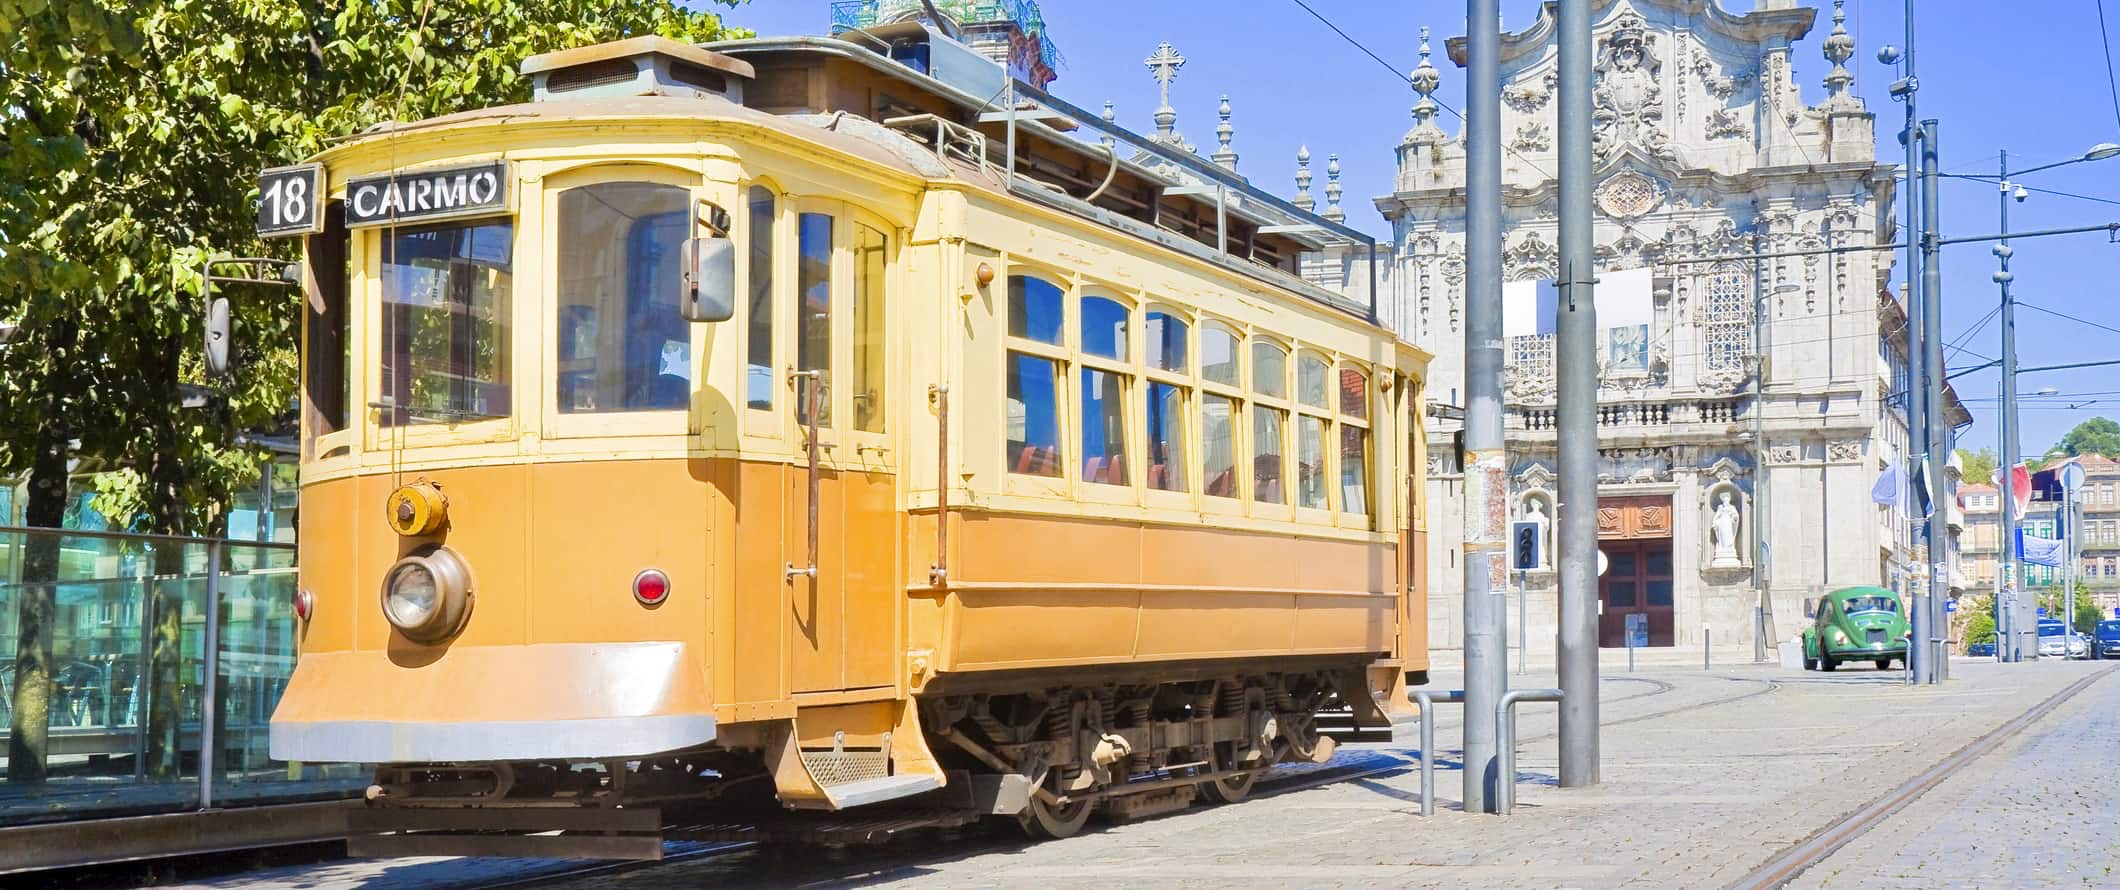 The classic yellow street car on a sunny day in Porto, Portugal